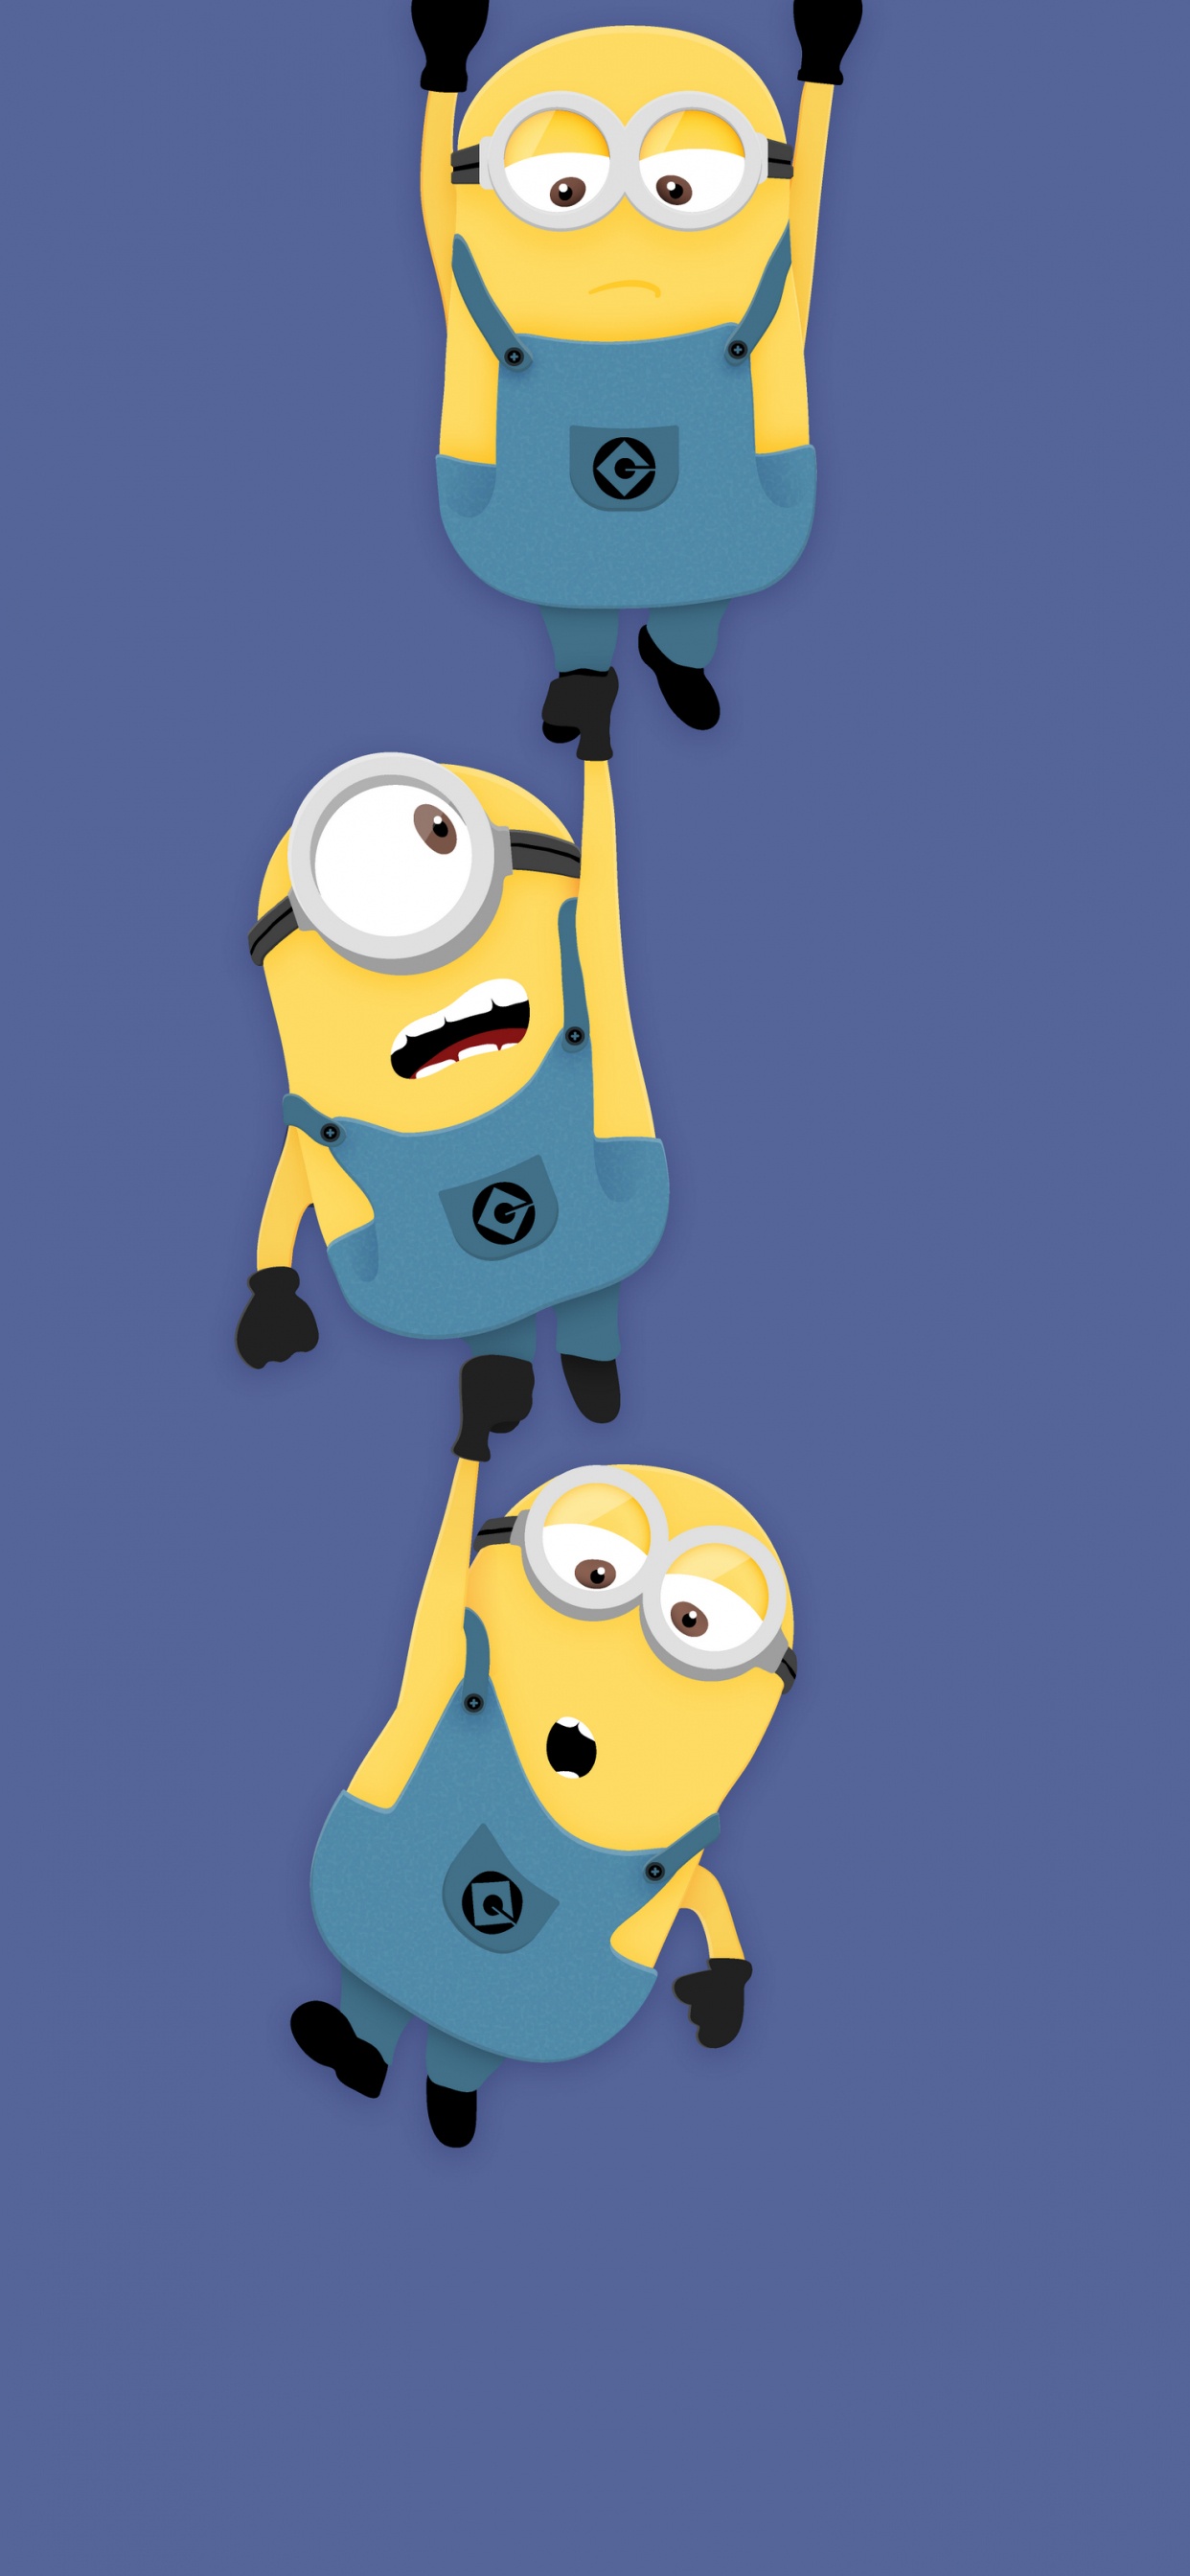 Cartoon, Minions, Coupon, Facial Expression, Gesture. Wallpaper in 1242x2688 Resolution